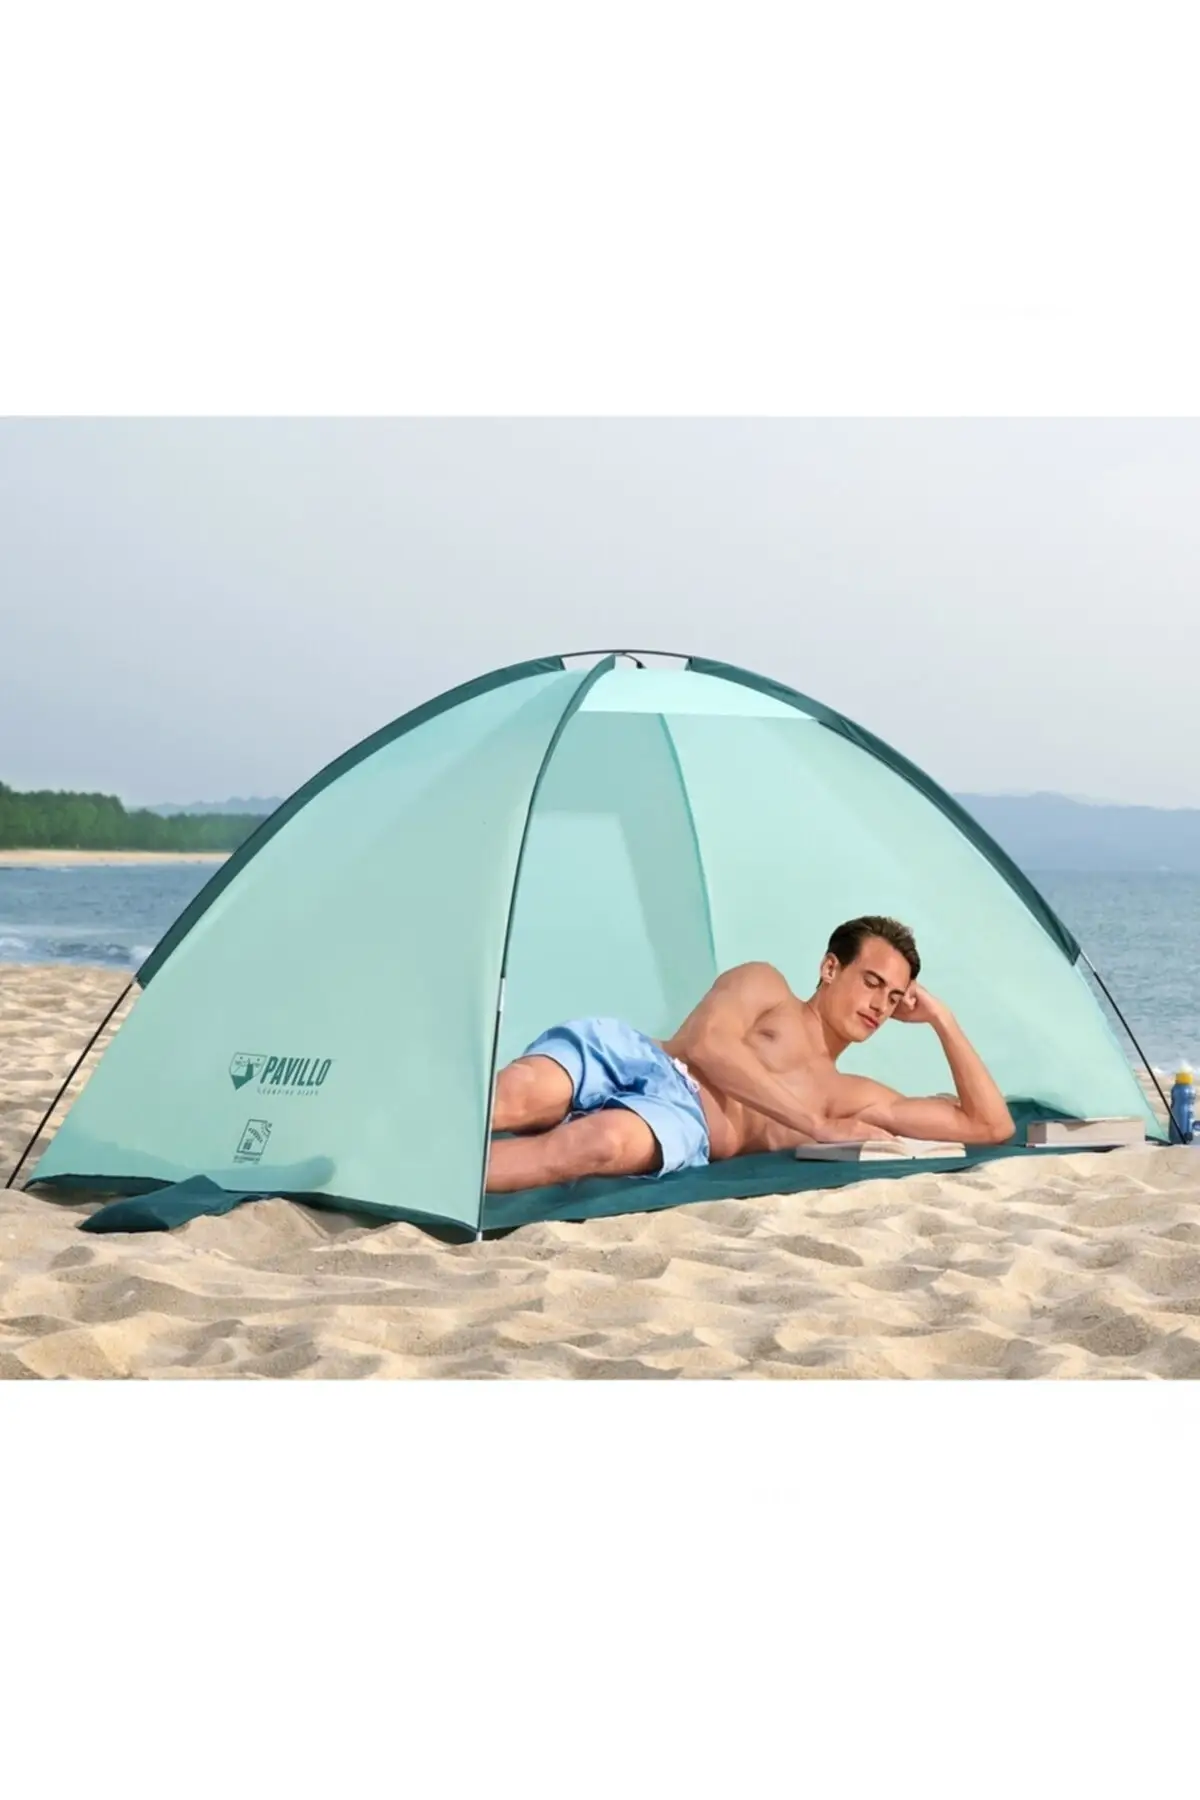 2 person beach tent solar shelter for garden camping fishing game tent